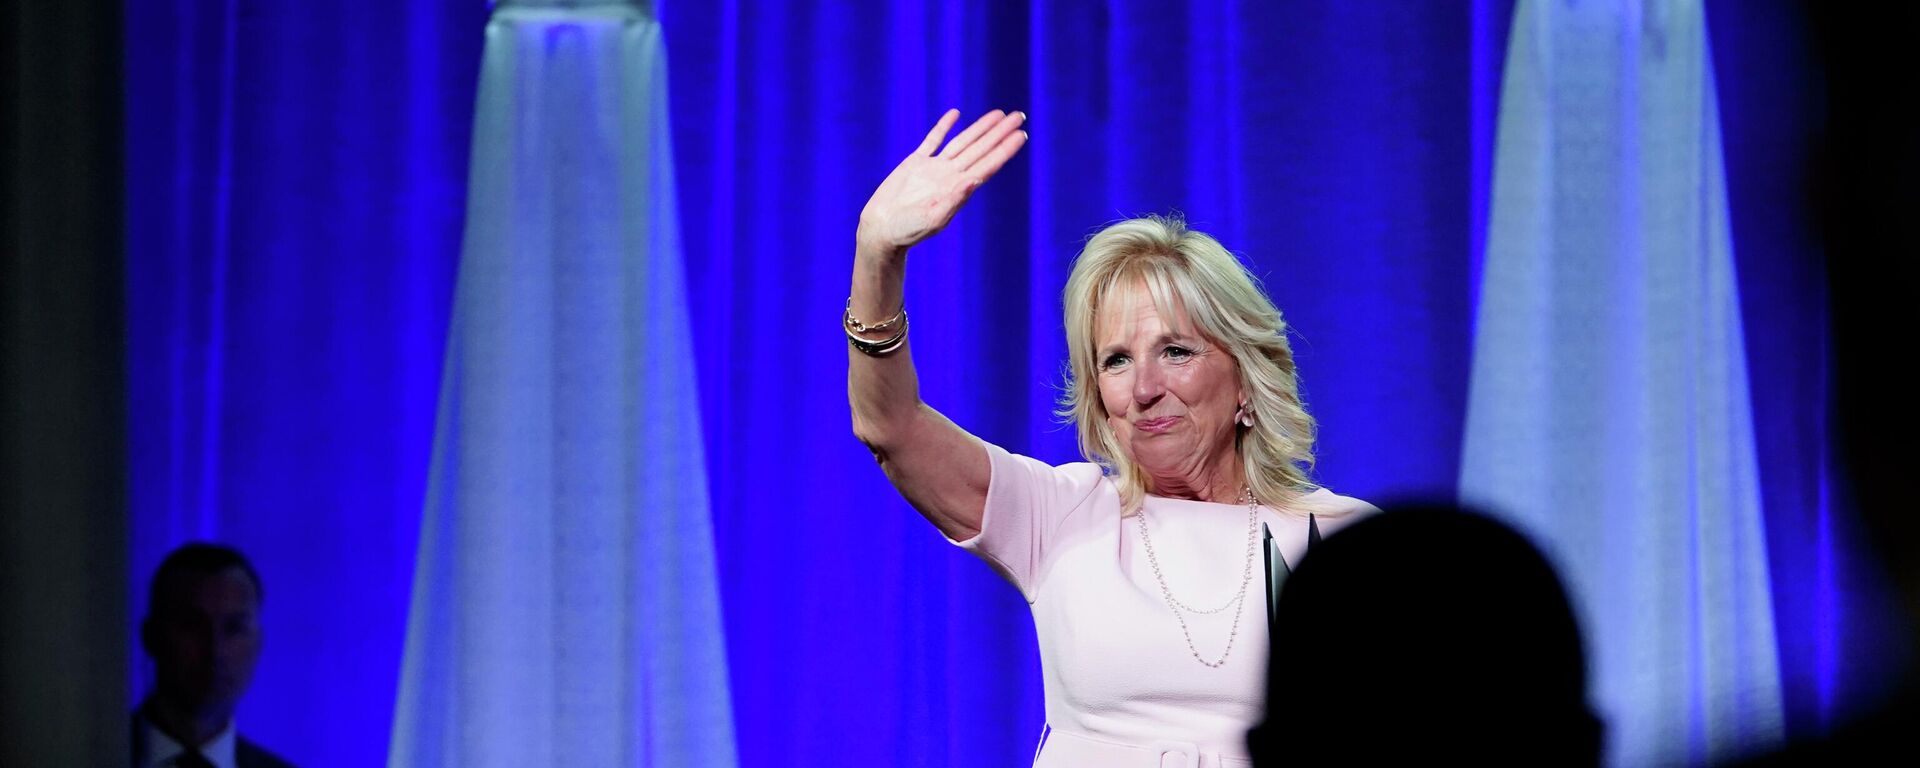 First lady Jill Biden waves to the audience after speaking at the 125th Anniversary Convention of the National Parent Teacher Association (PTA) in National Harbor, Md., Friday, June 17, 2022. - Sputnik International, 1920, 24.02.2023